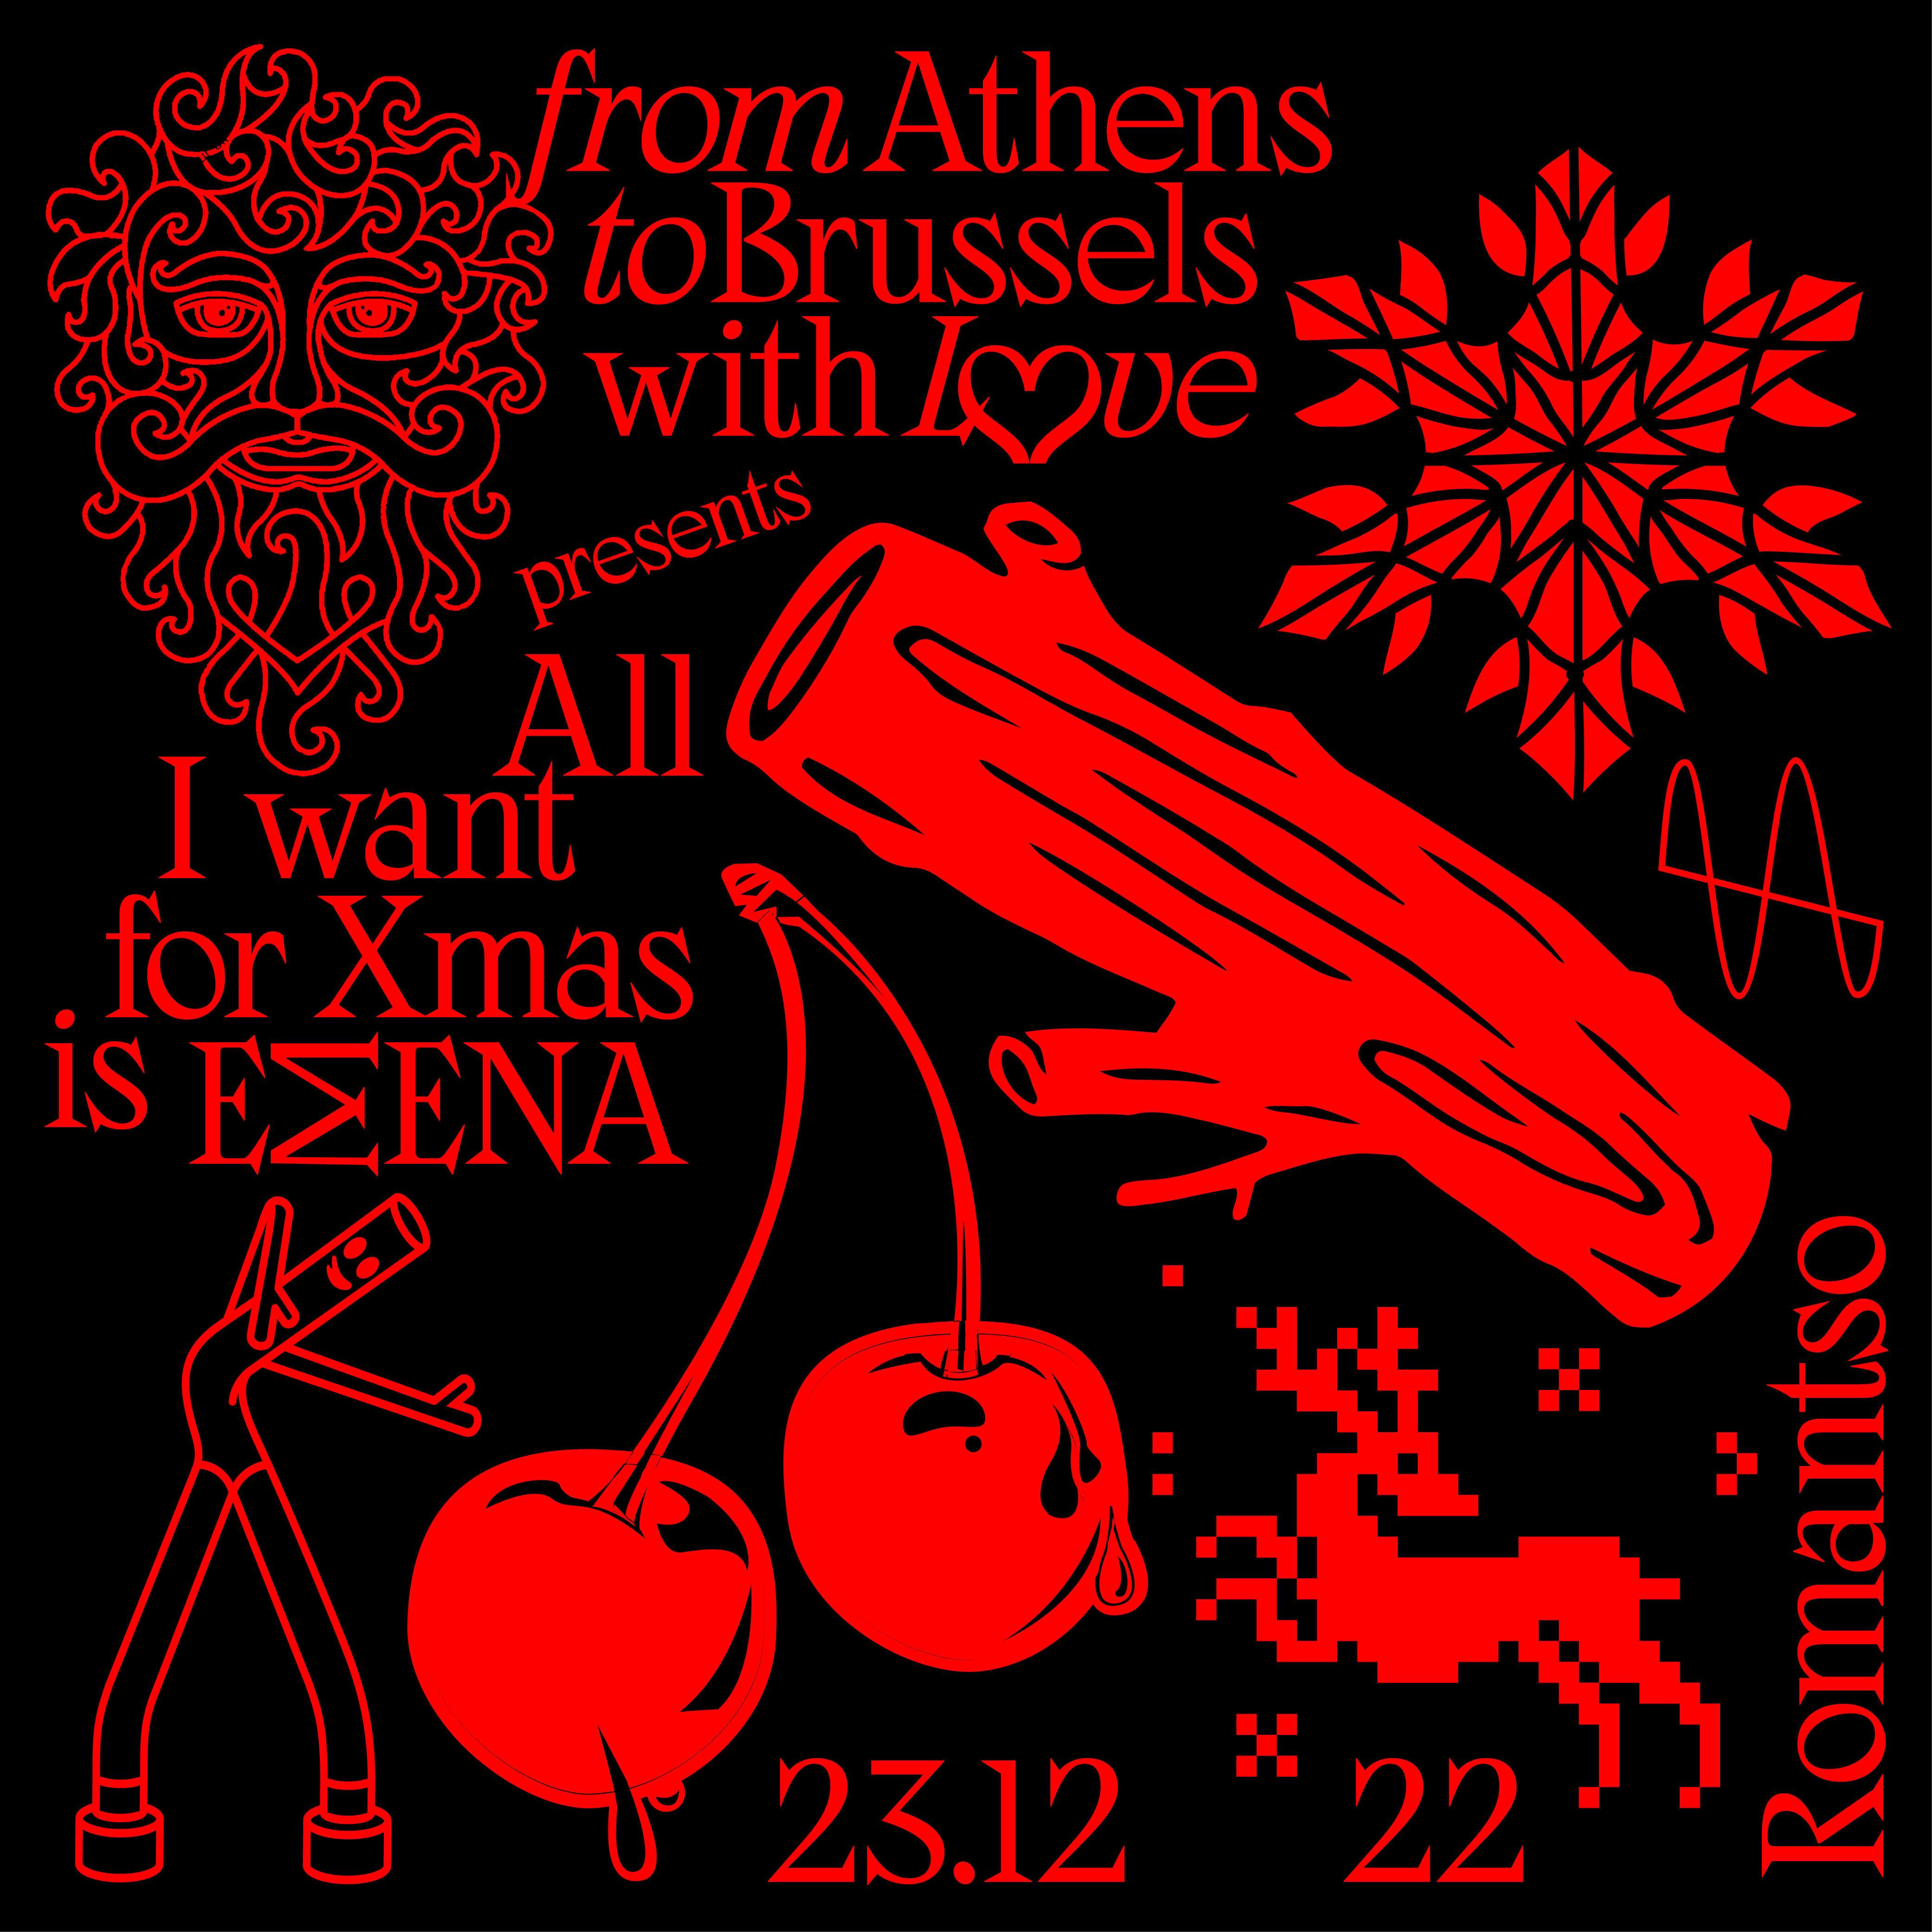 From Athens to Brussels with love presents All I want for Xmas is ΕΣΕΝΑ - Página frontal